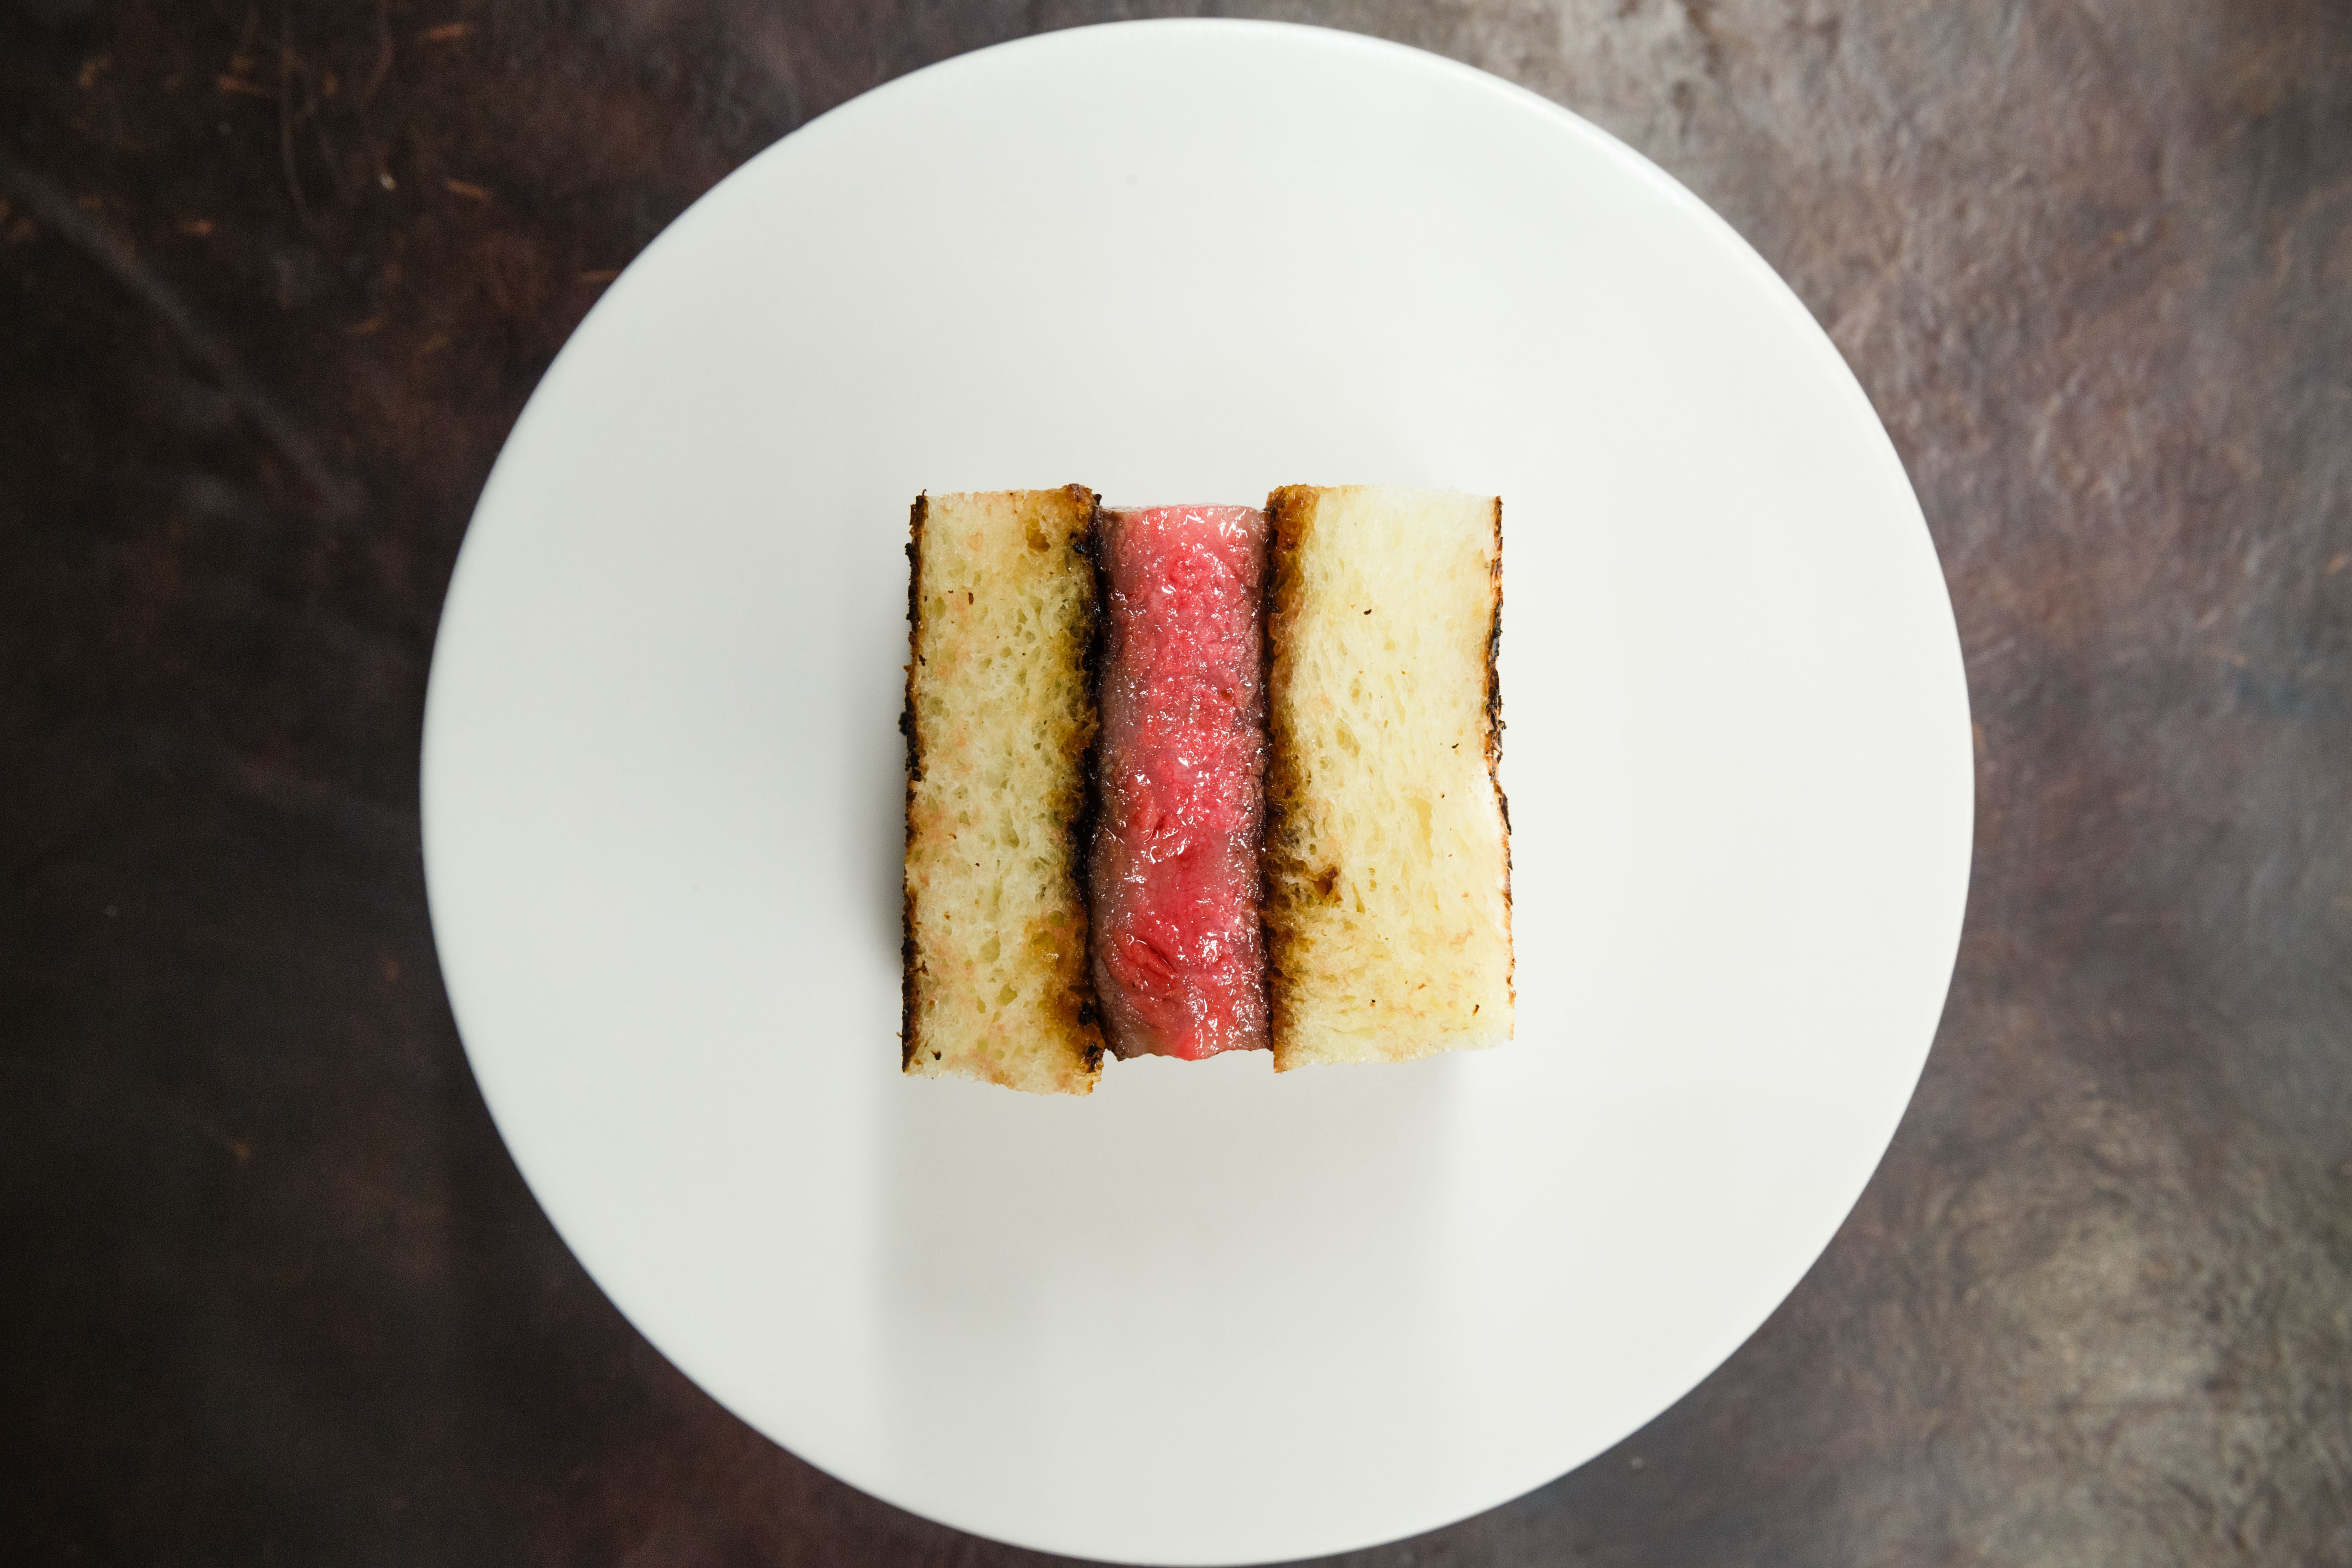 a wagyu sandwich — pink meat between crustless slices of white bread — sits on a white plate.